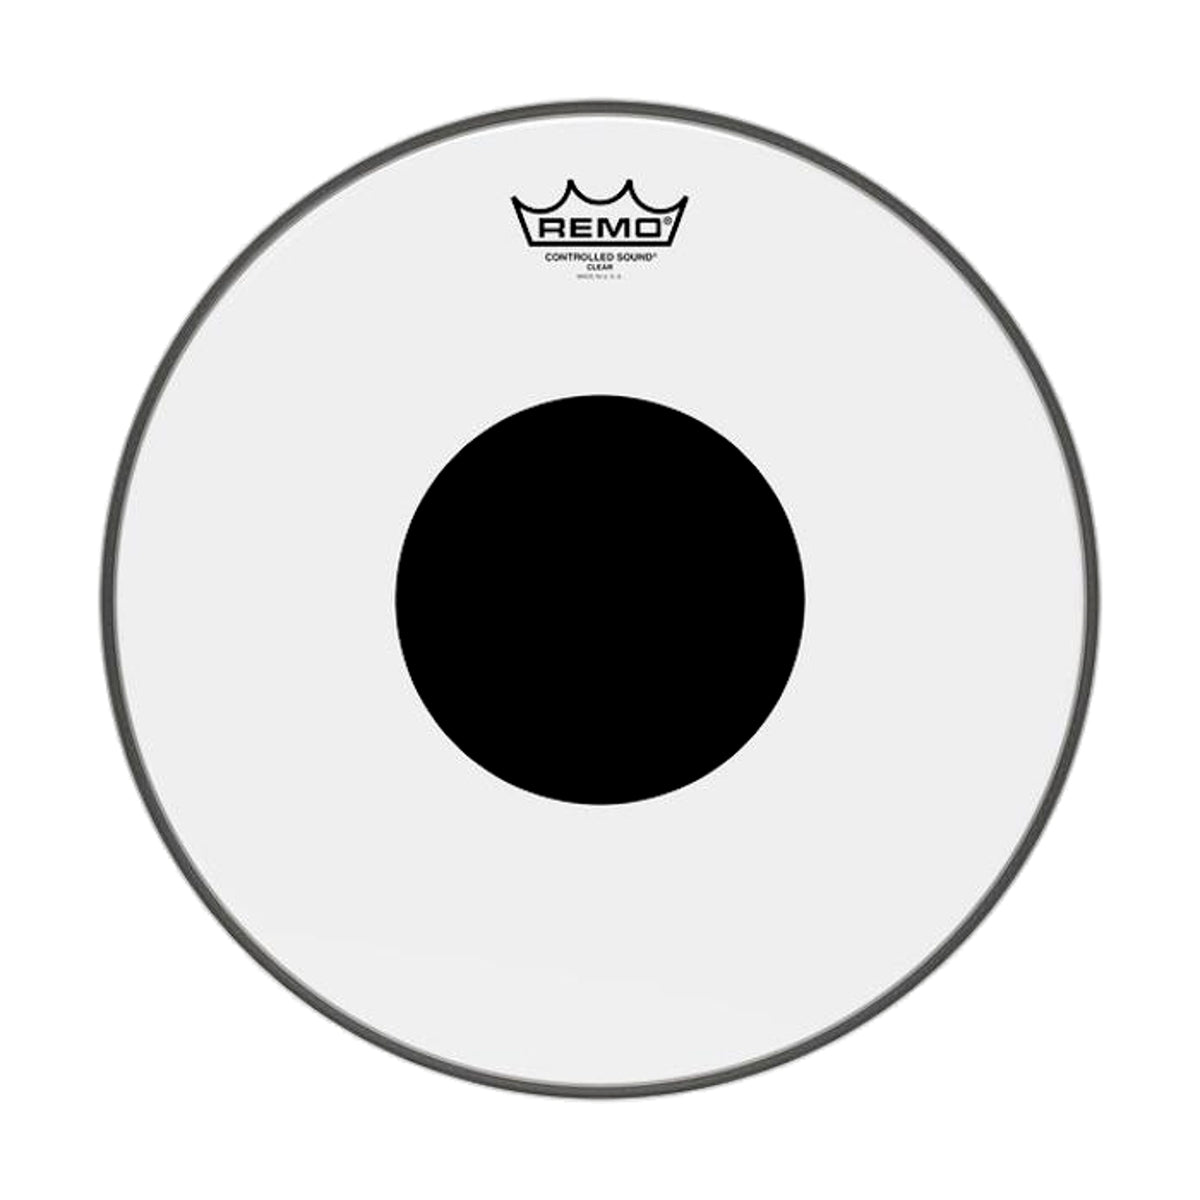 Remo Controlled Sound Clear Top Black Dot 24 Inch Bass Drum Head